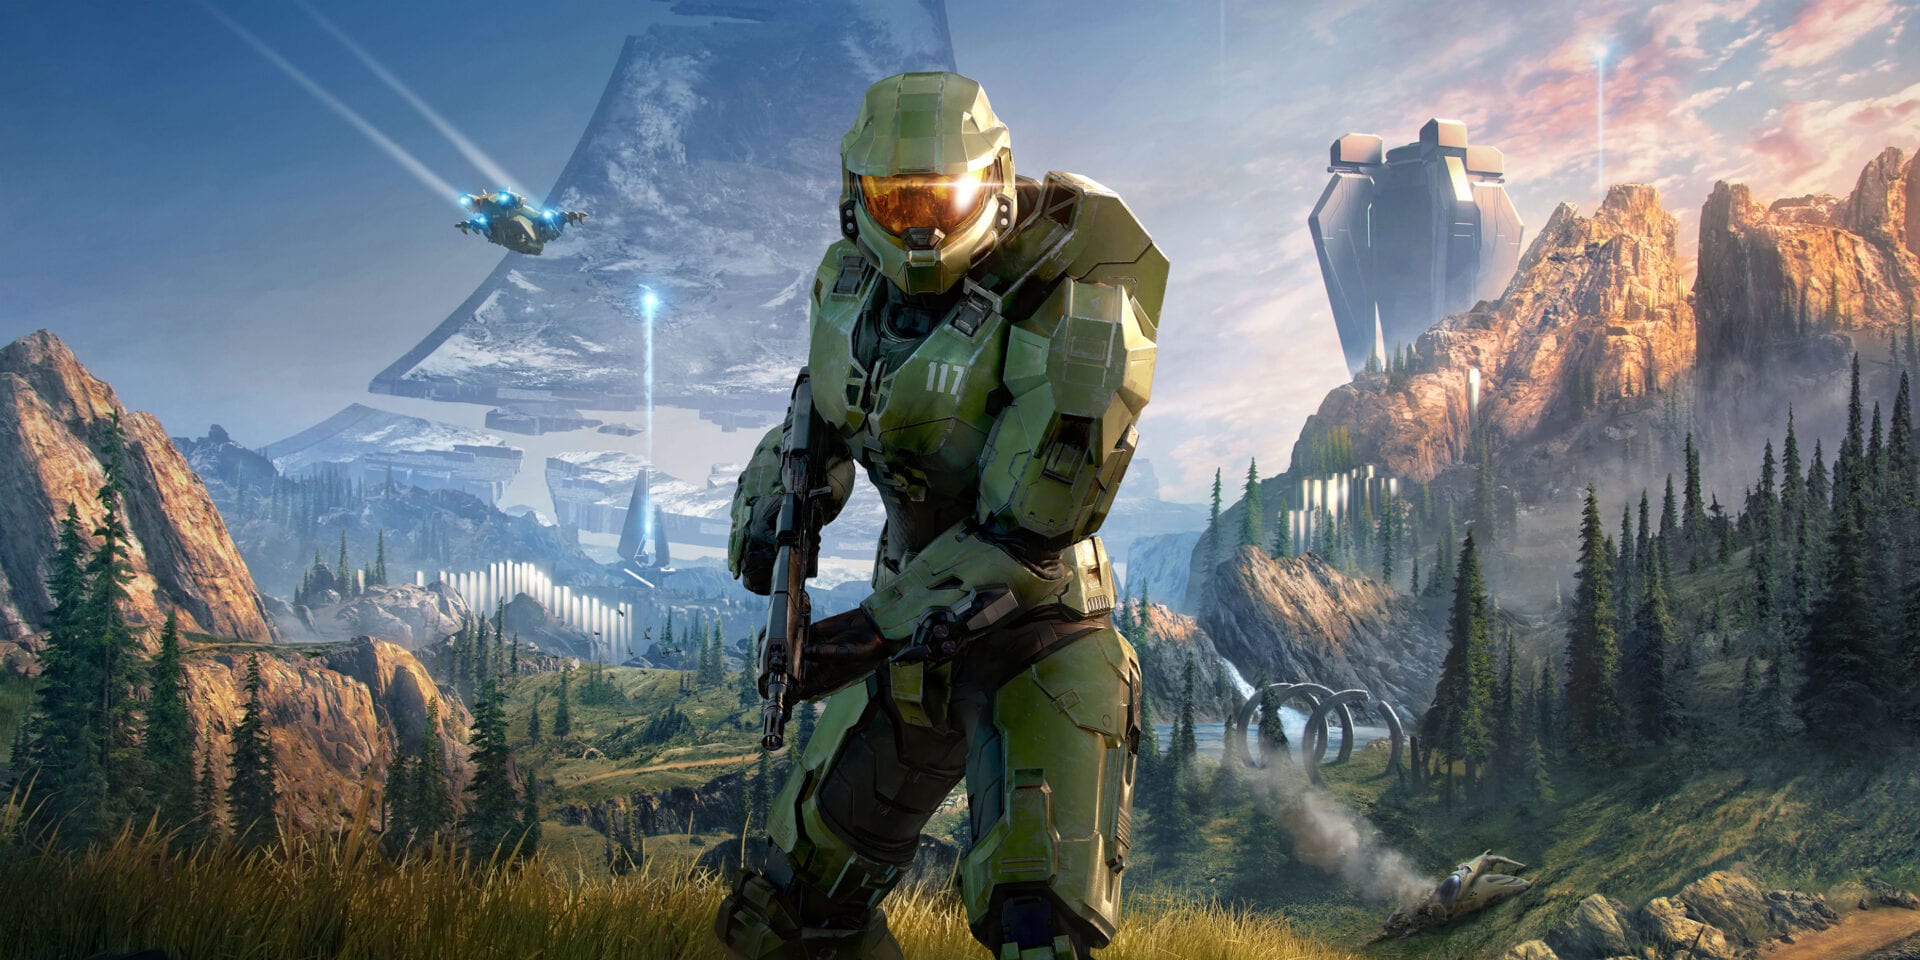 Halo, video game anniversaries in 2021